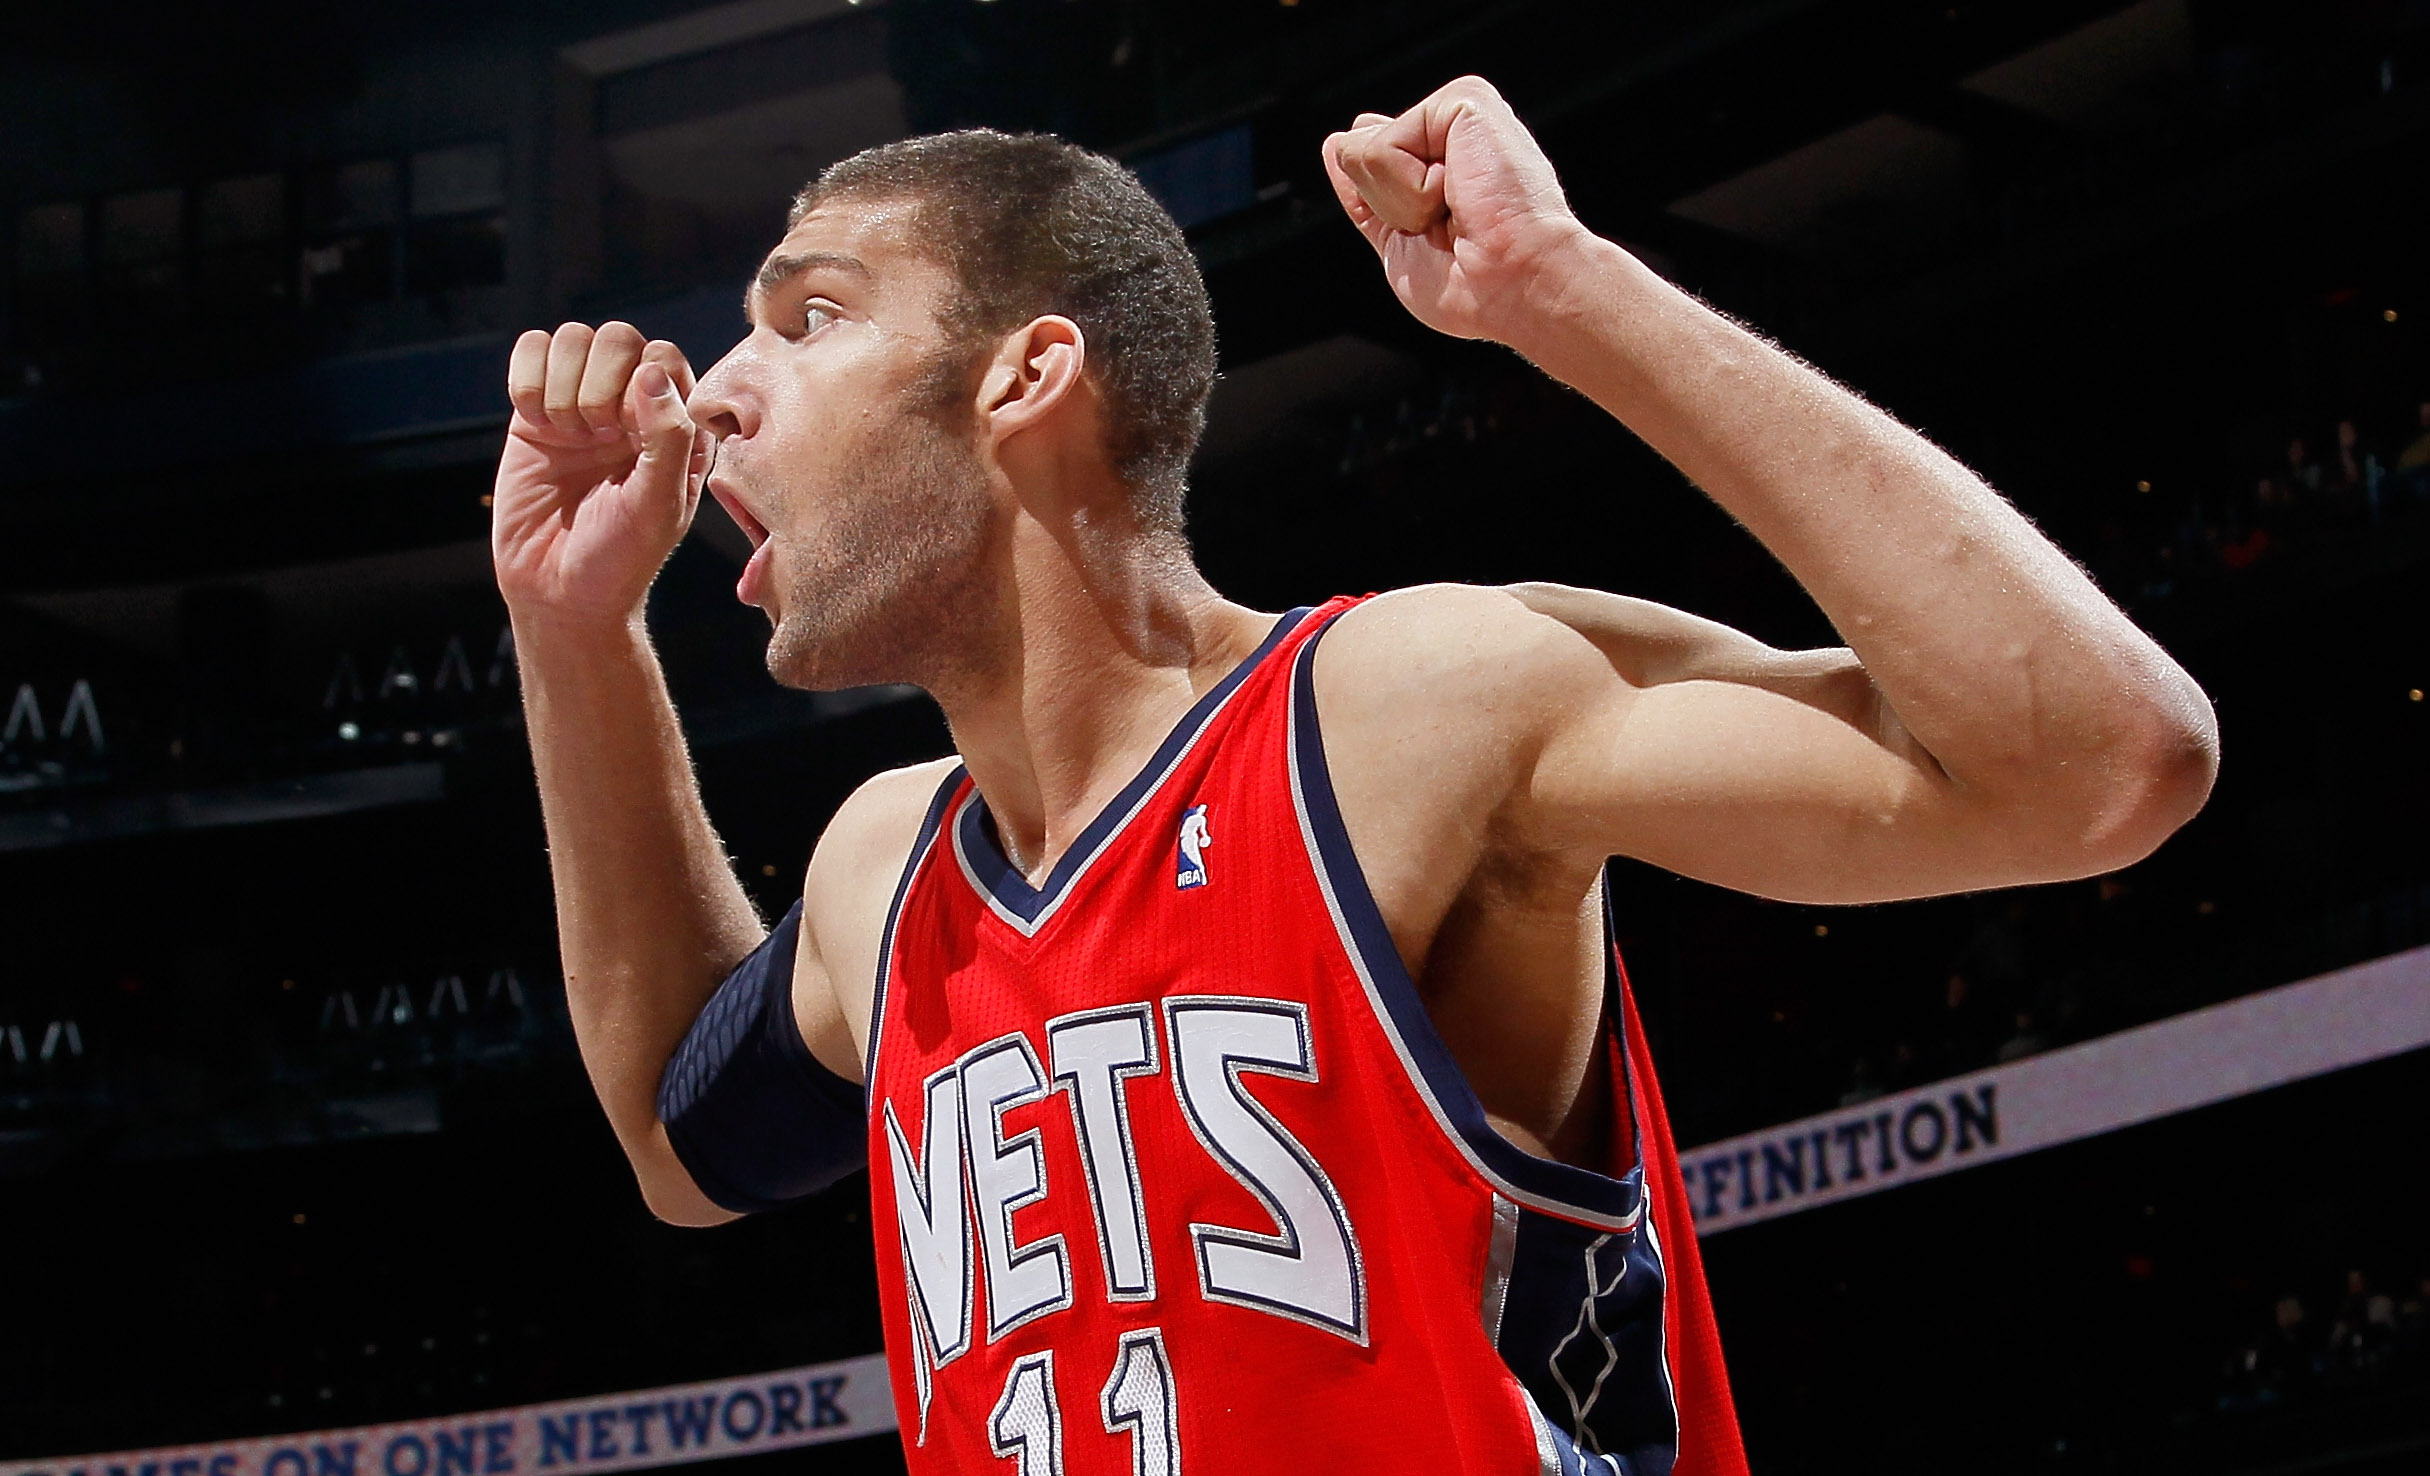 ATLANTA, GA - DECEMBER 07:   Brook Lopez #11 of the New Jersey Nets reacts after being called for a foul against the Atlanta Hawks at Philips Arena on December 7, 2010 in Atlanta, Georgia.  NOTE TO USER: User expressly acknowledges and agrees that, by dow